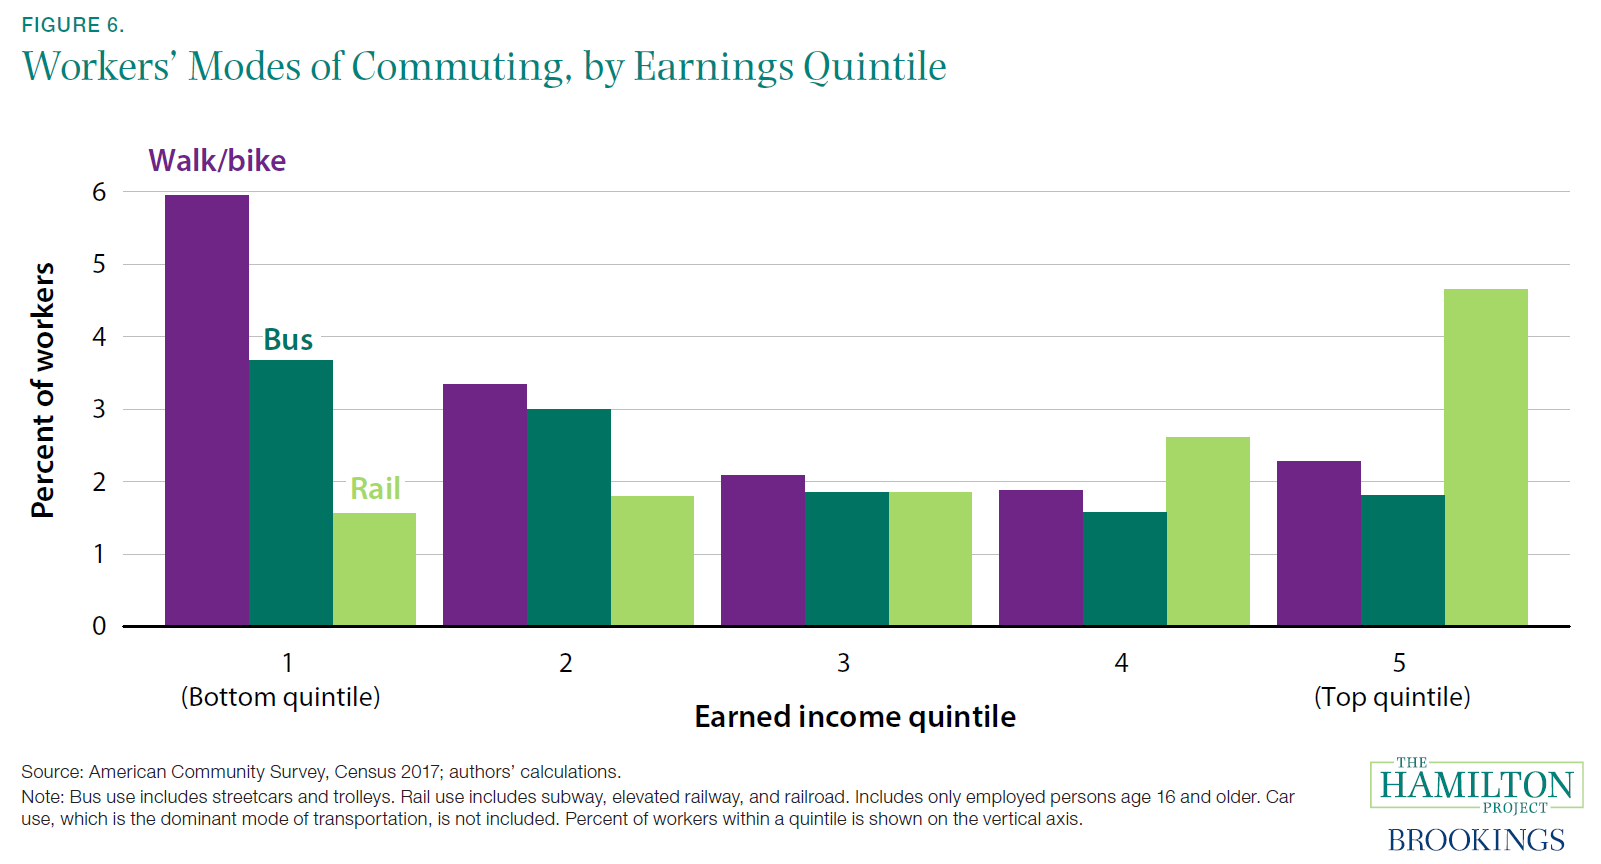 Workers' Modes of Commuting, by Earnings Quintile